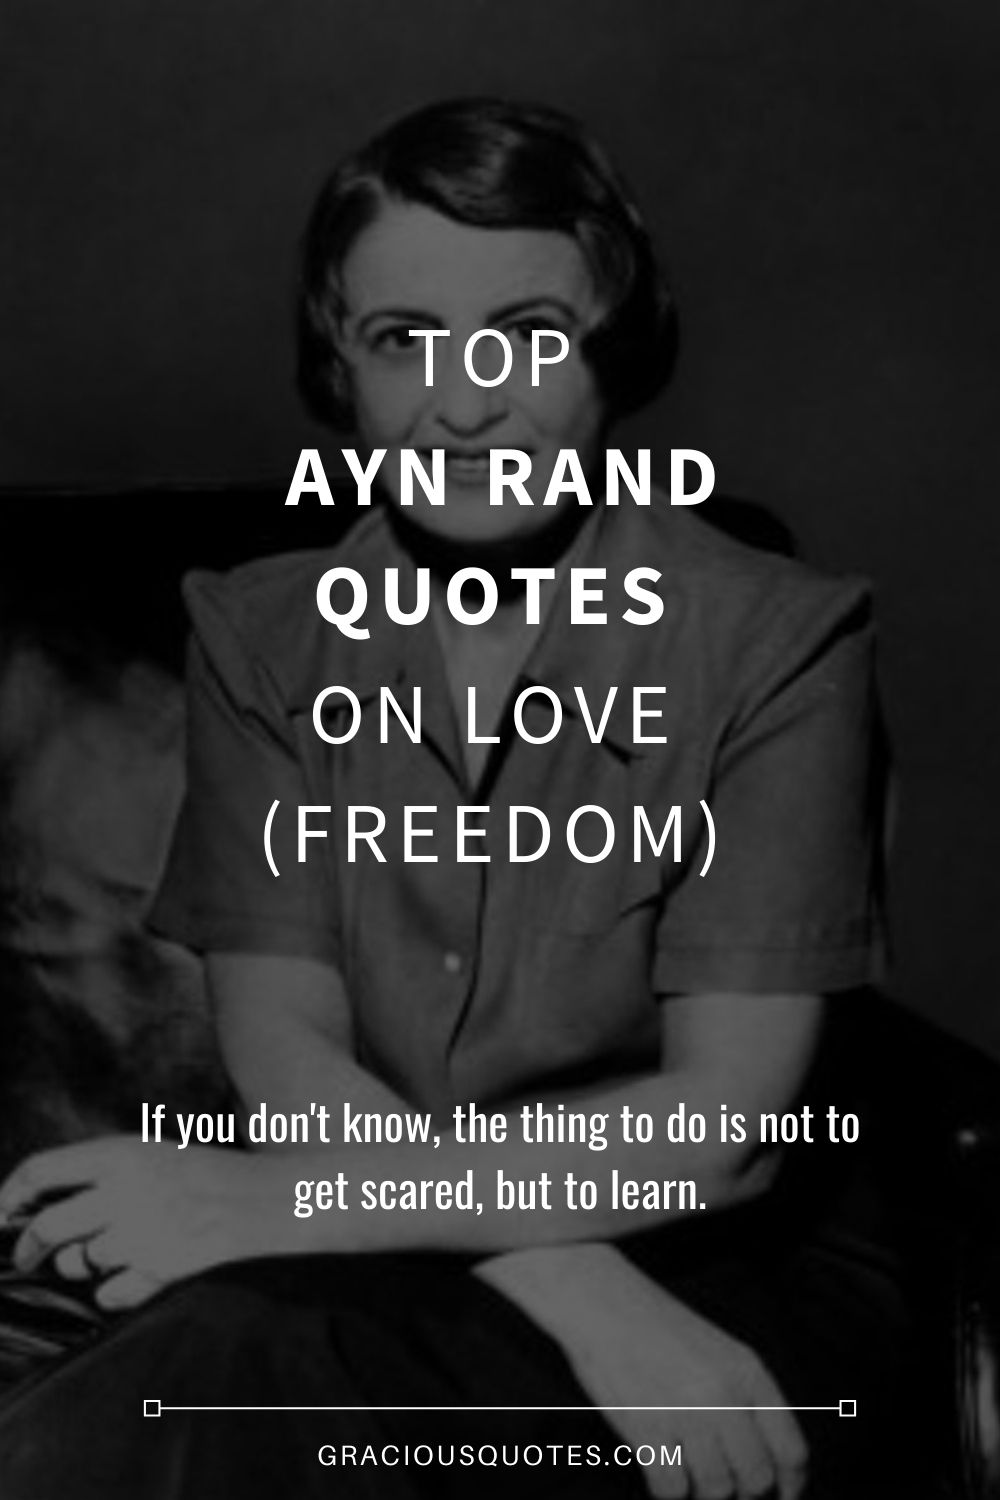 Top 47 Ayn Rand Quotes on Love (FREEDOM)